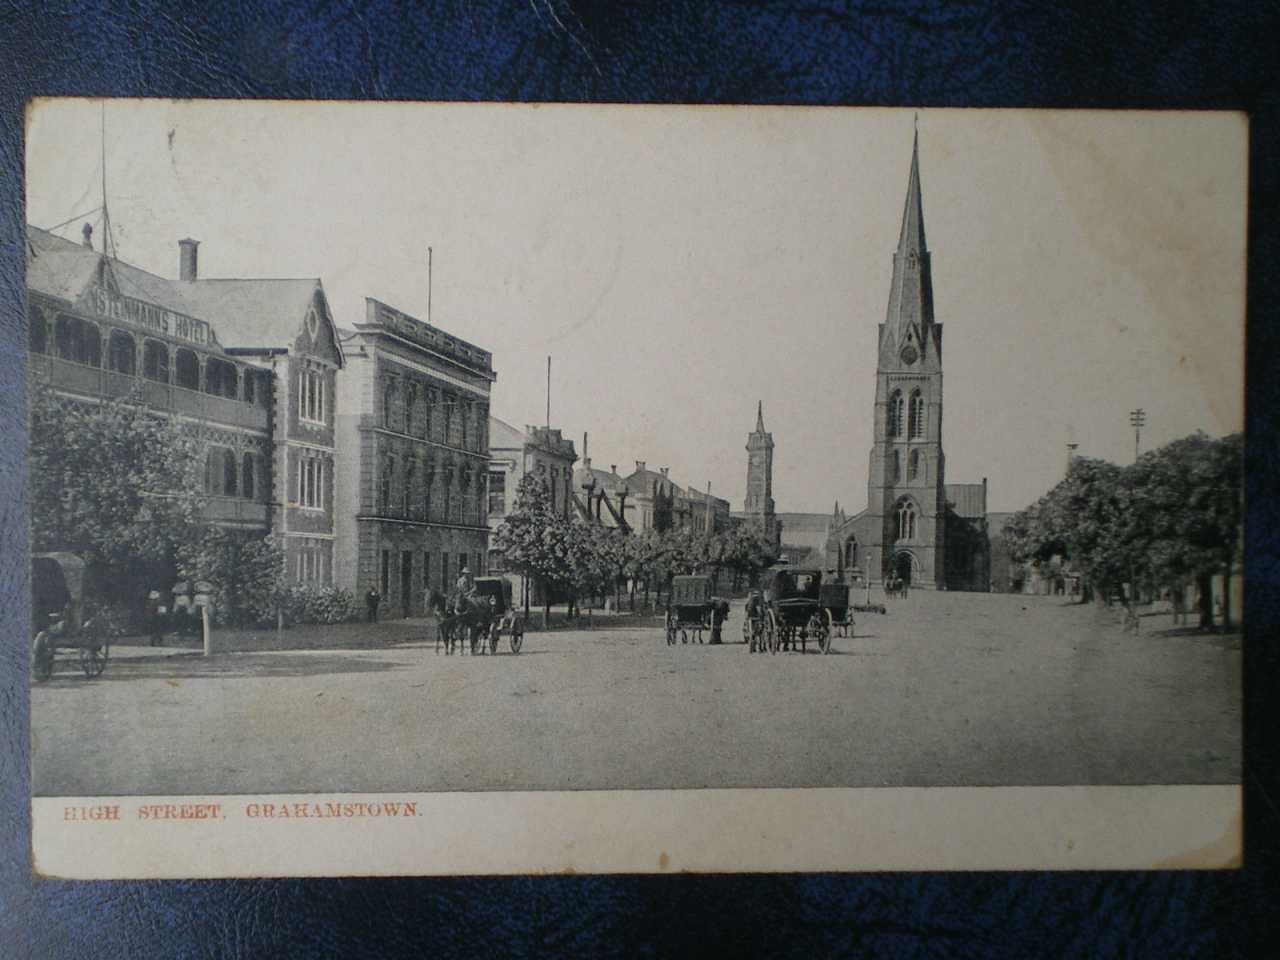 High Street, Grahamstown, Cape, South Africa 1908